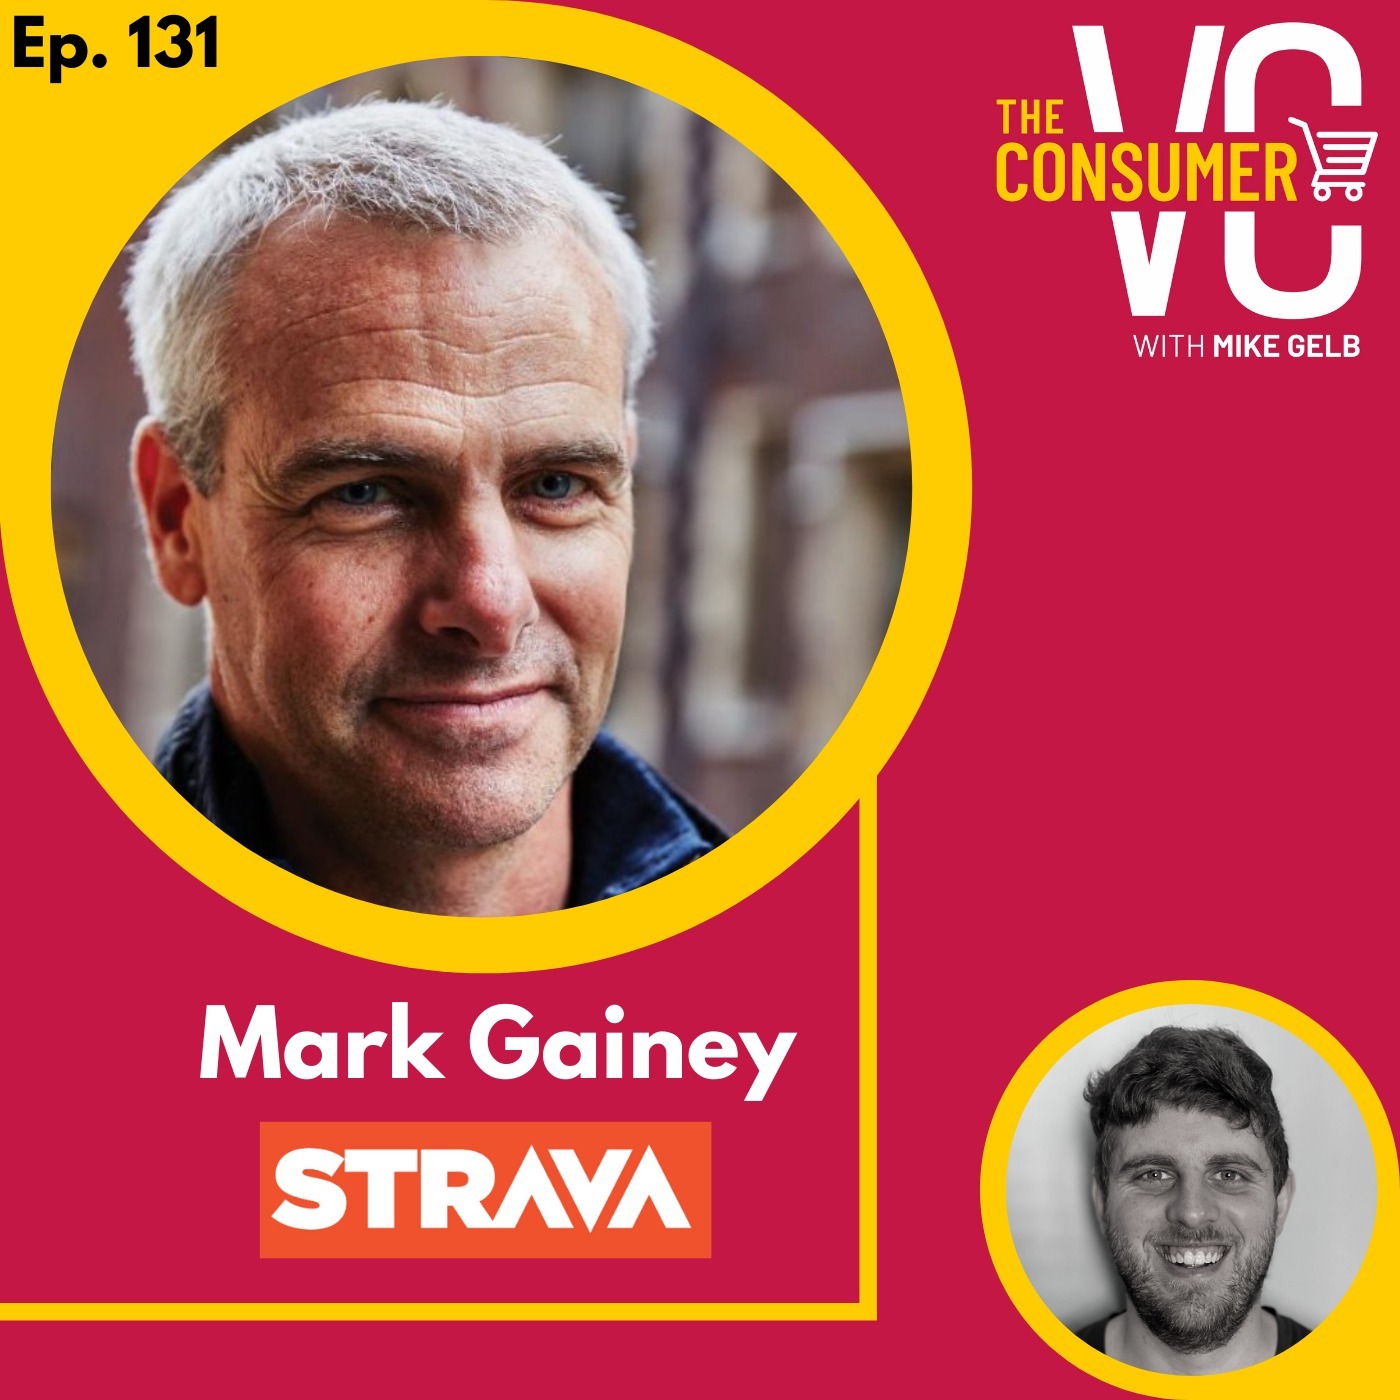 Mark Gainey (Strava) - Building the social network for athletes